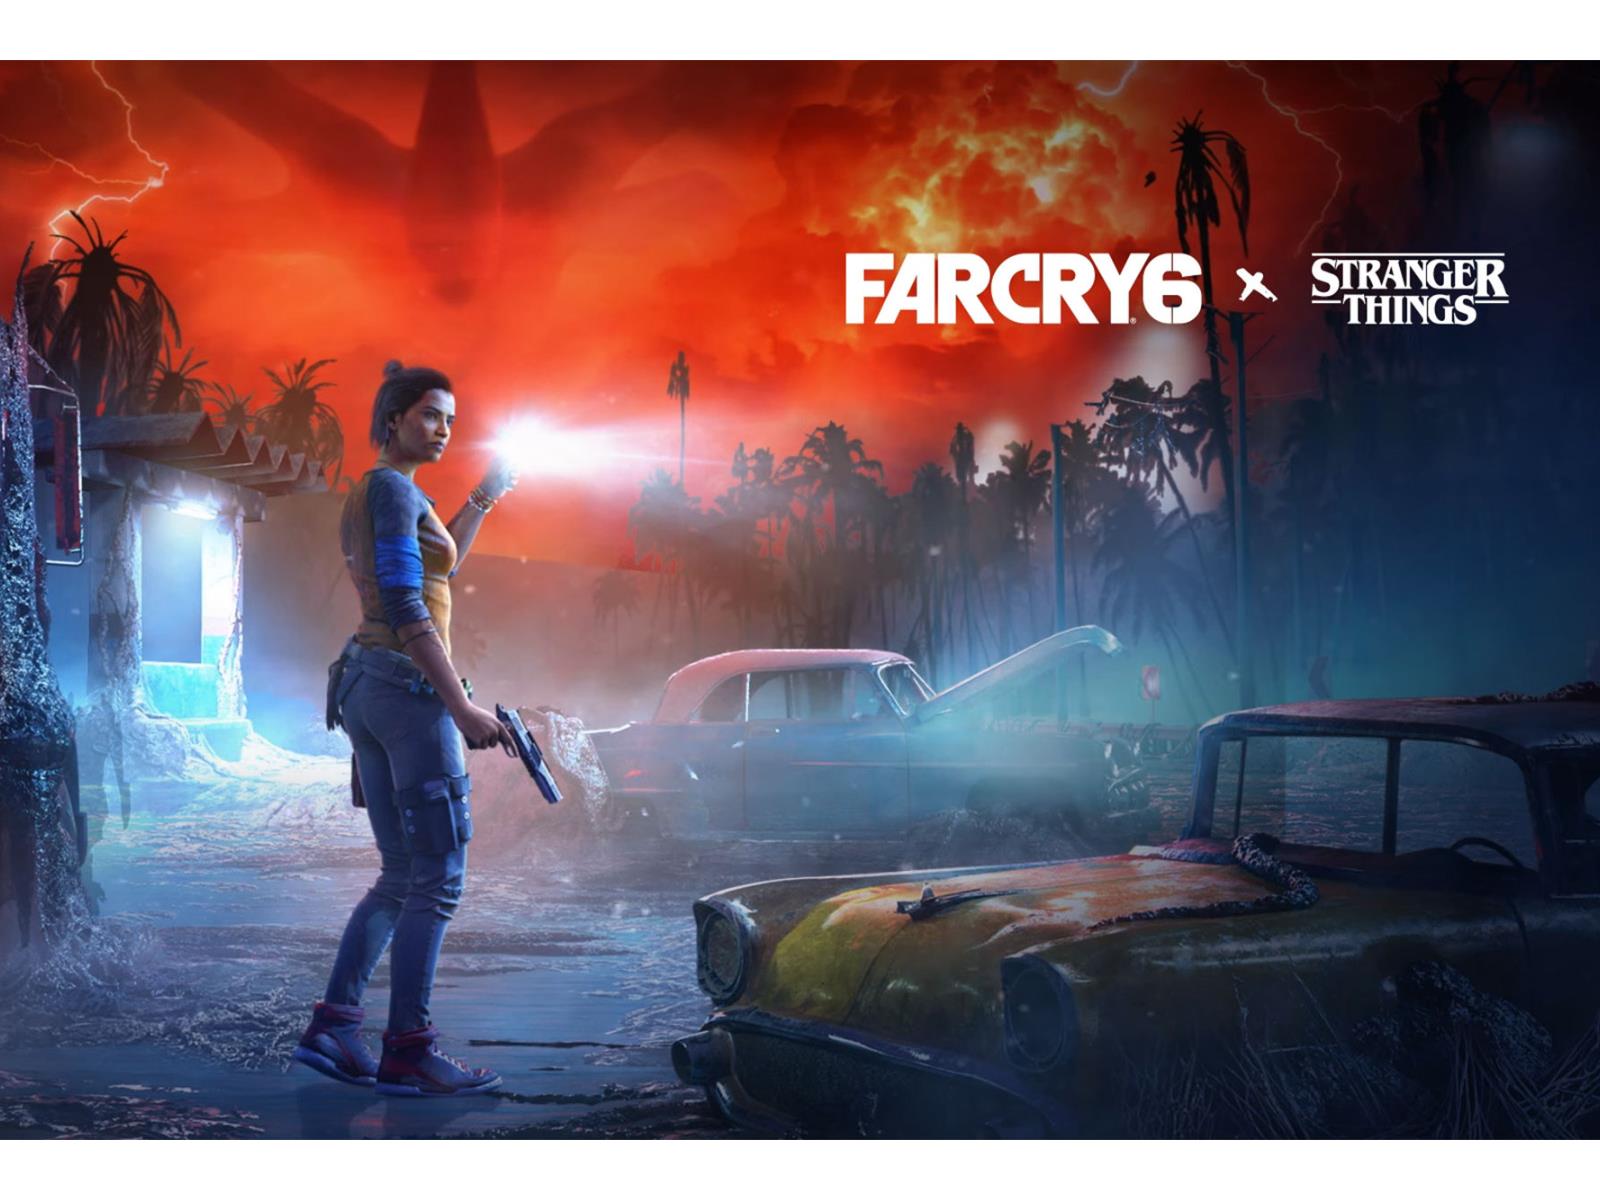 Far Cry 6 Stranger Things Crossover DLC Is Coming And You Can Play For Free